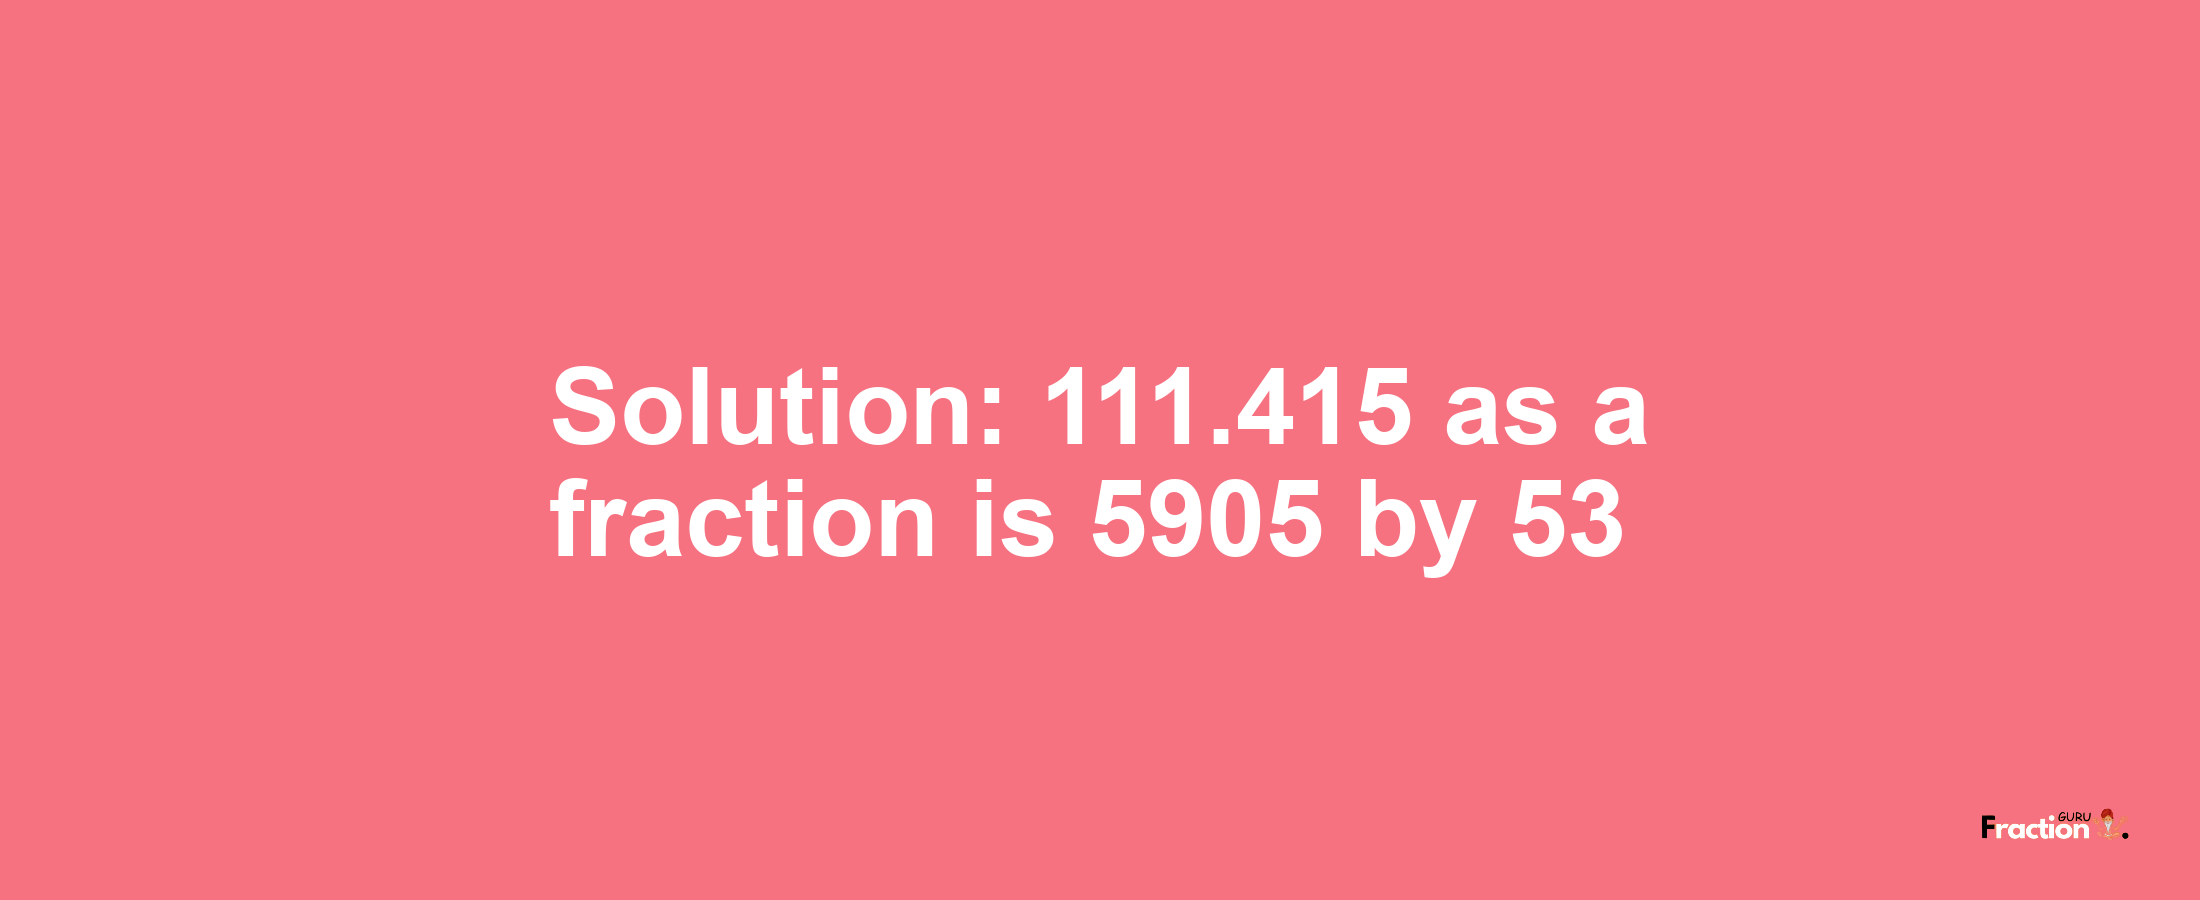 Solution:111.415 as a fraction is 5905/53